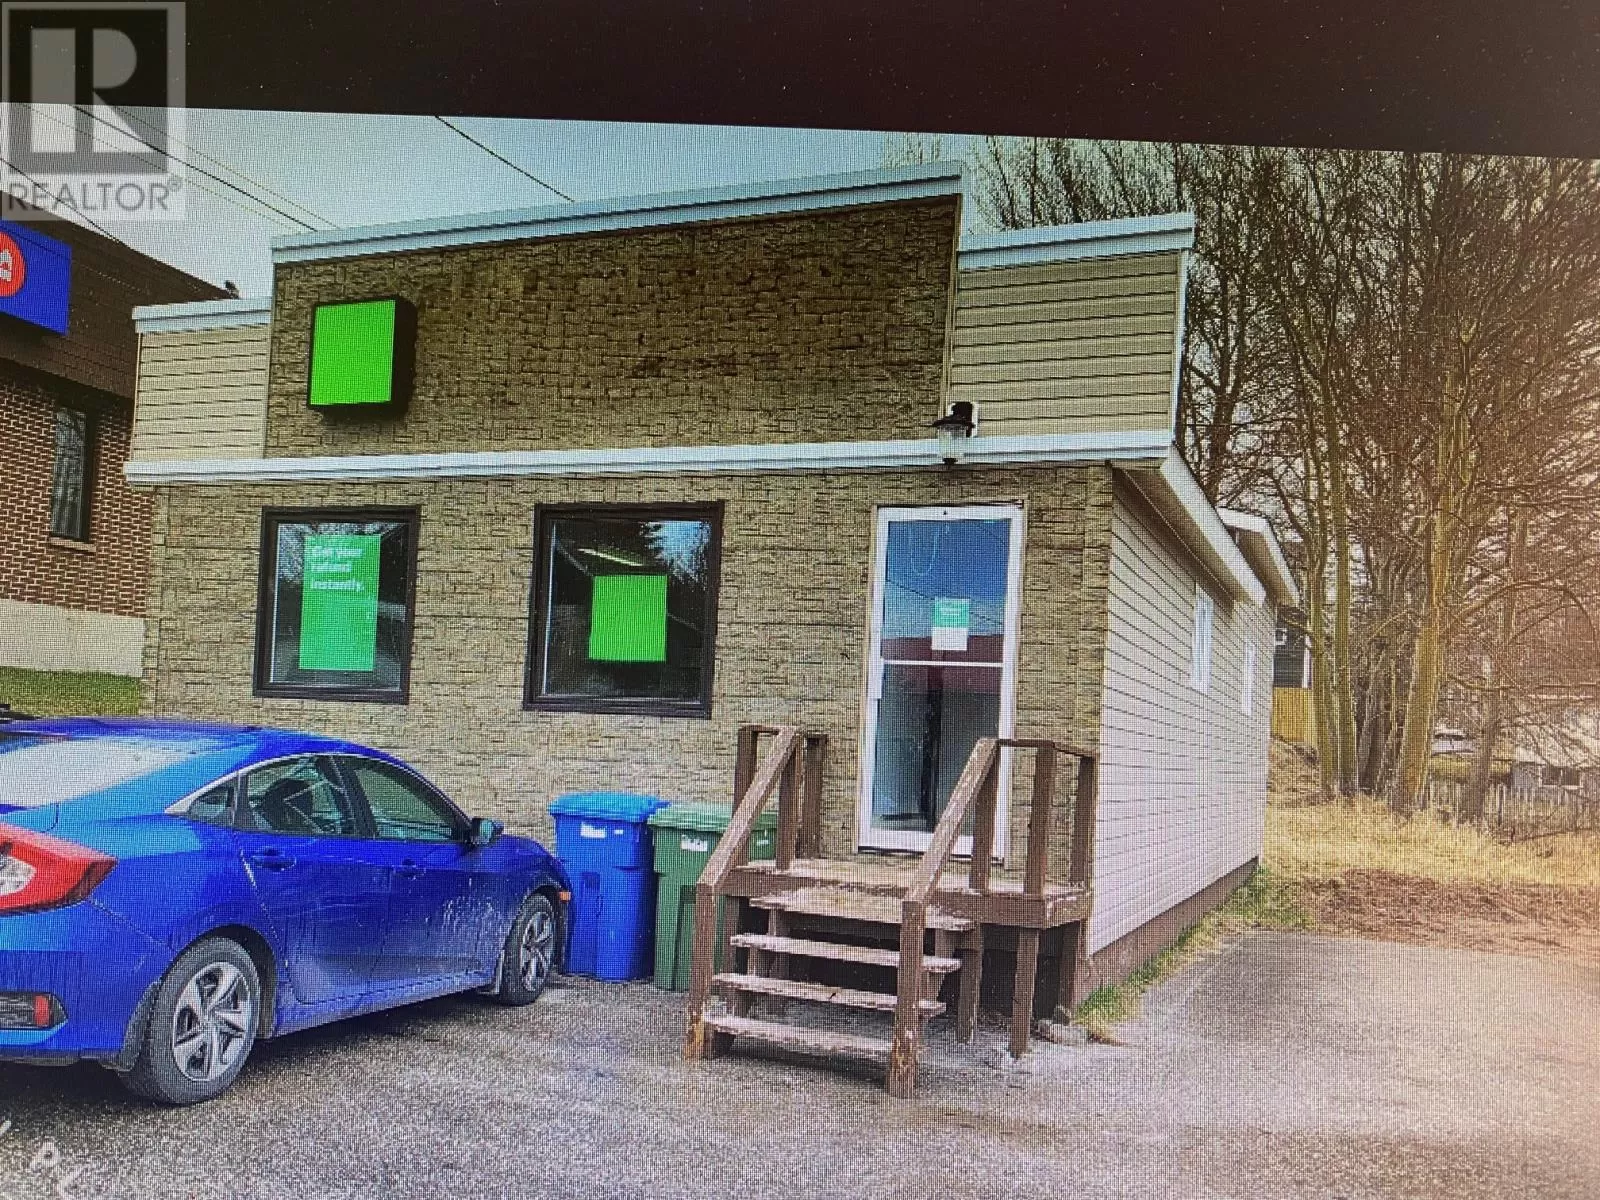 Retail for rent: 6-8 Pennell's Lane, Deer Lake, Newfoundland & Labrador A8A 1Y4